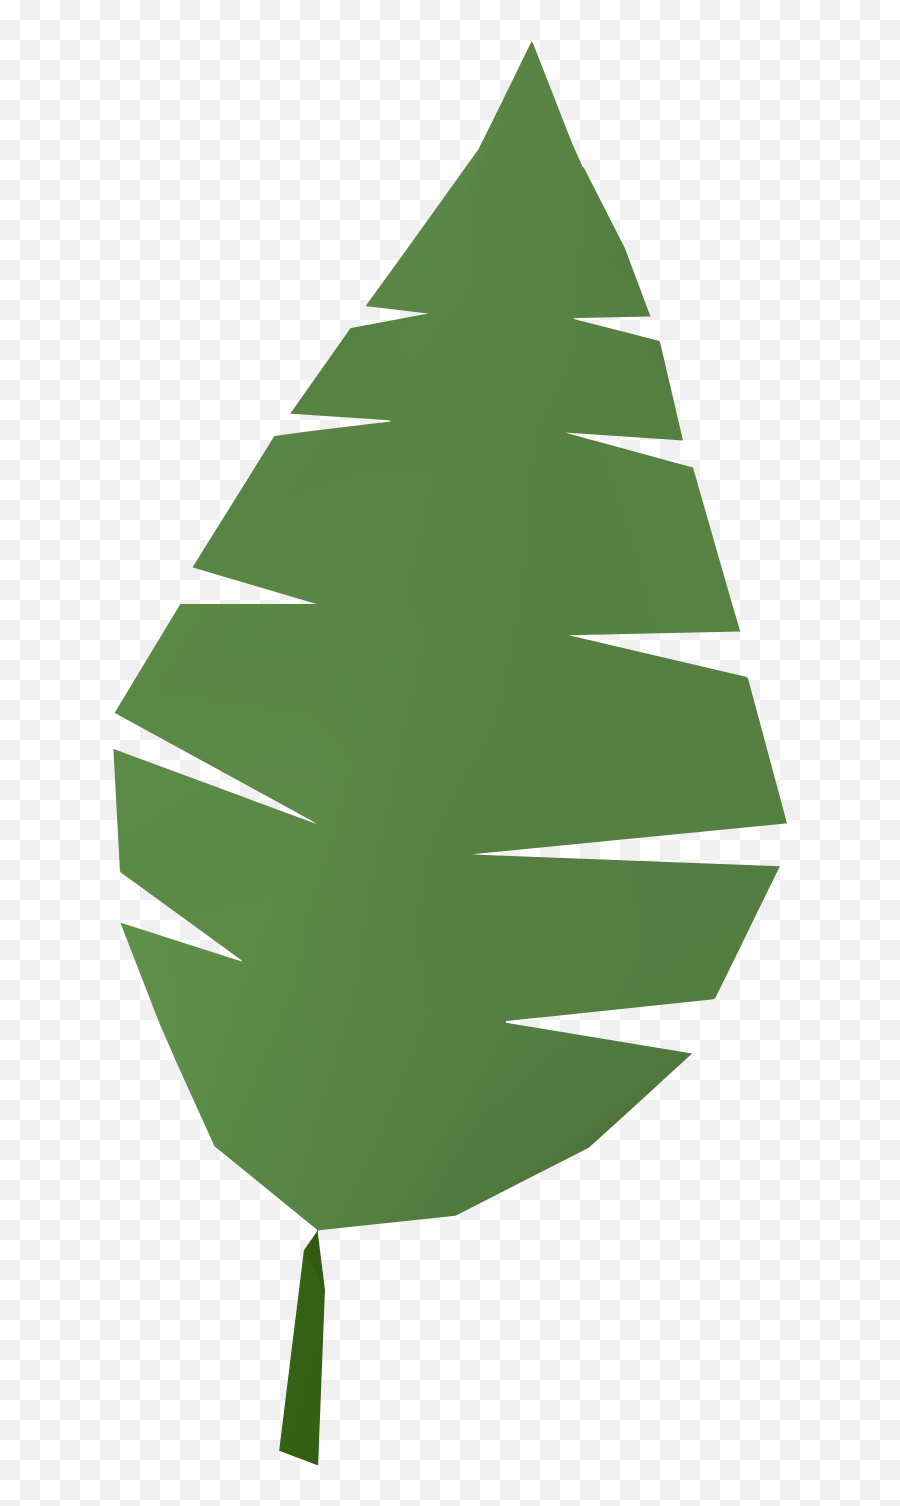 Free Jungle Leaf Template Download 194370 - Png Palm Tree Leaf Clipart,Jungle Tree Png